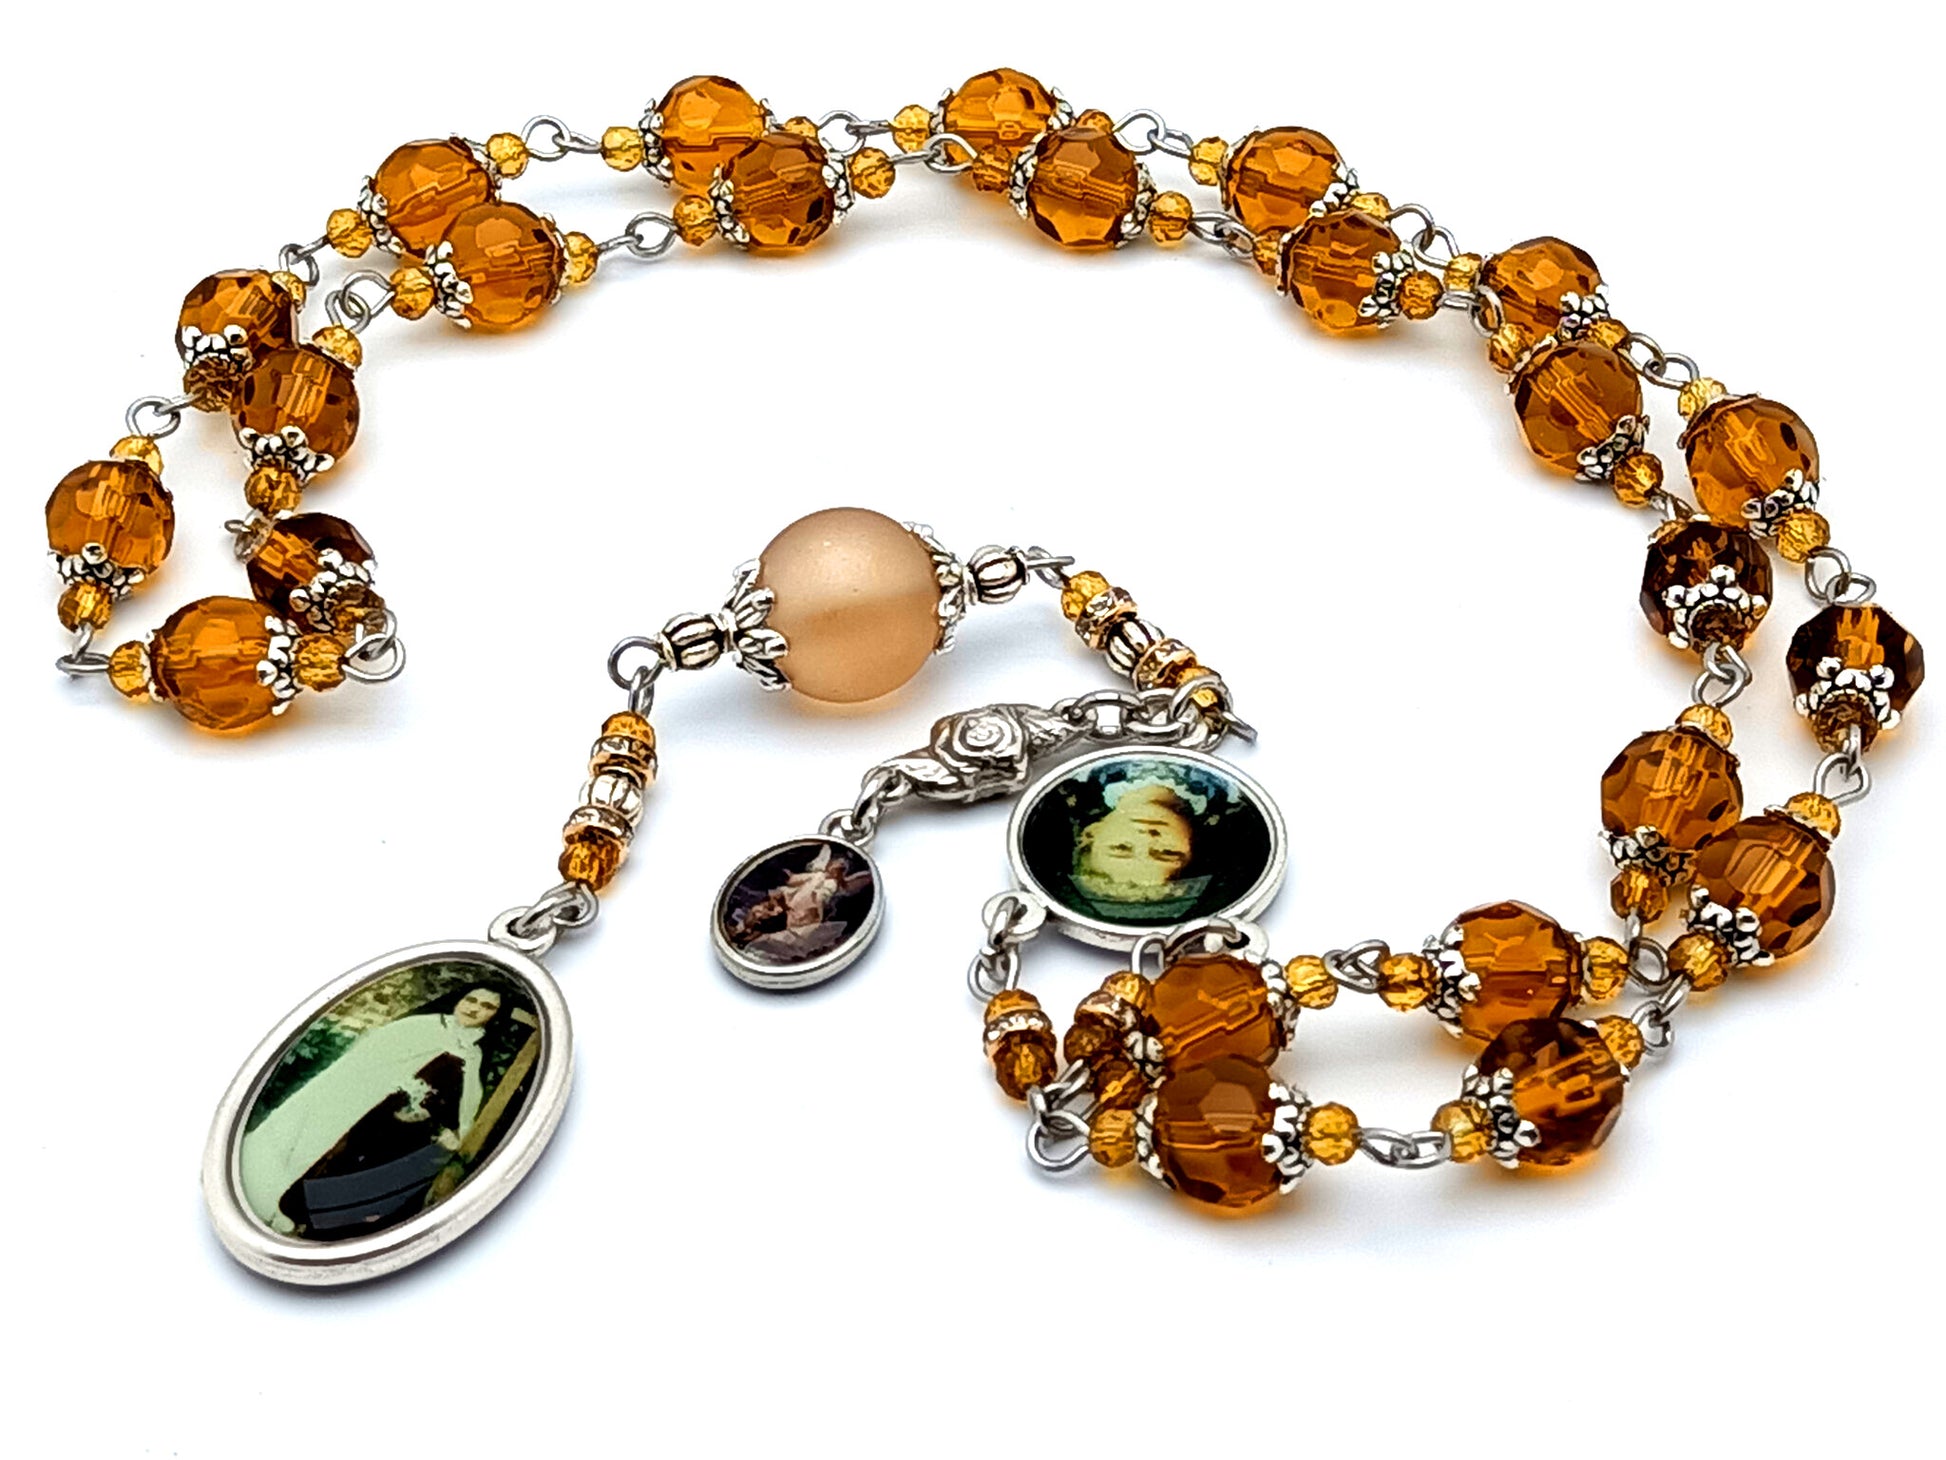 Saint Therese of Lisieux unique rosary beads glass prayer chaplet with Guardian Angel picture medal and Saint Therese the little flower picture medal.